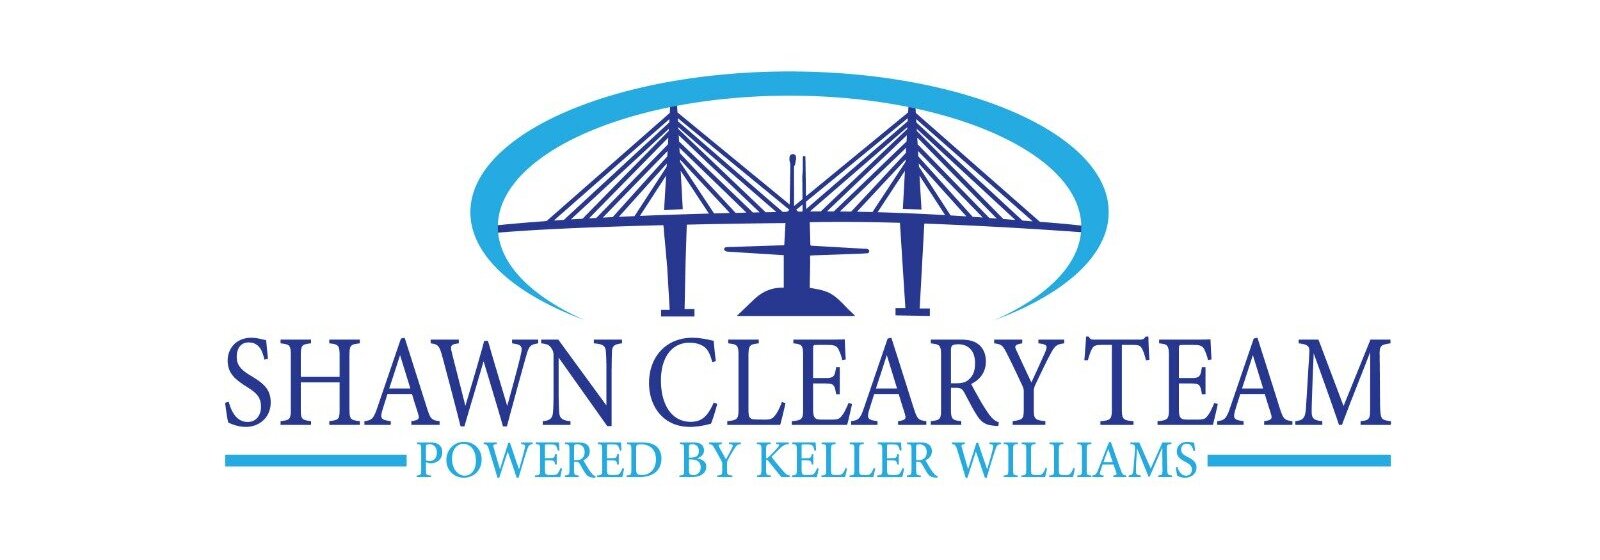 The Shawn Cleary Team logo